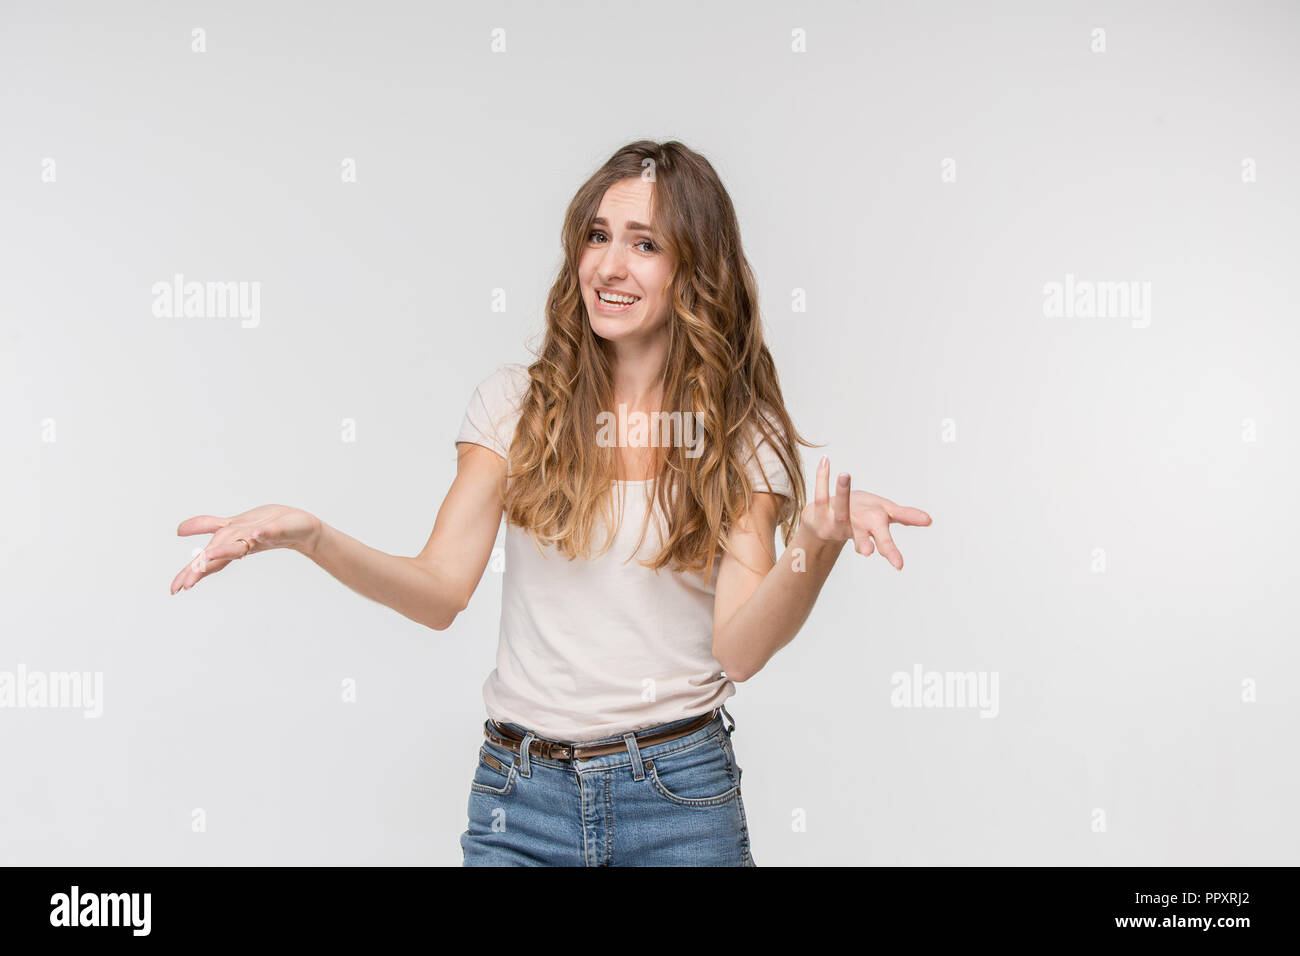 Why is that. Beautiful female half-length portrait isolated on white studio backgroud. Young emotional surprised, frustrated and bewildered woman. Human emotions, facial expression concept. Stock Photo